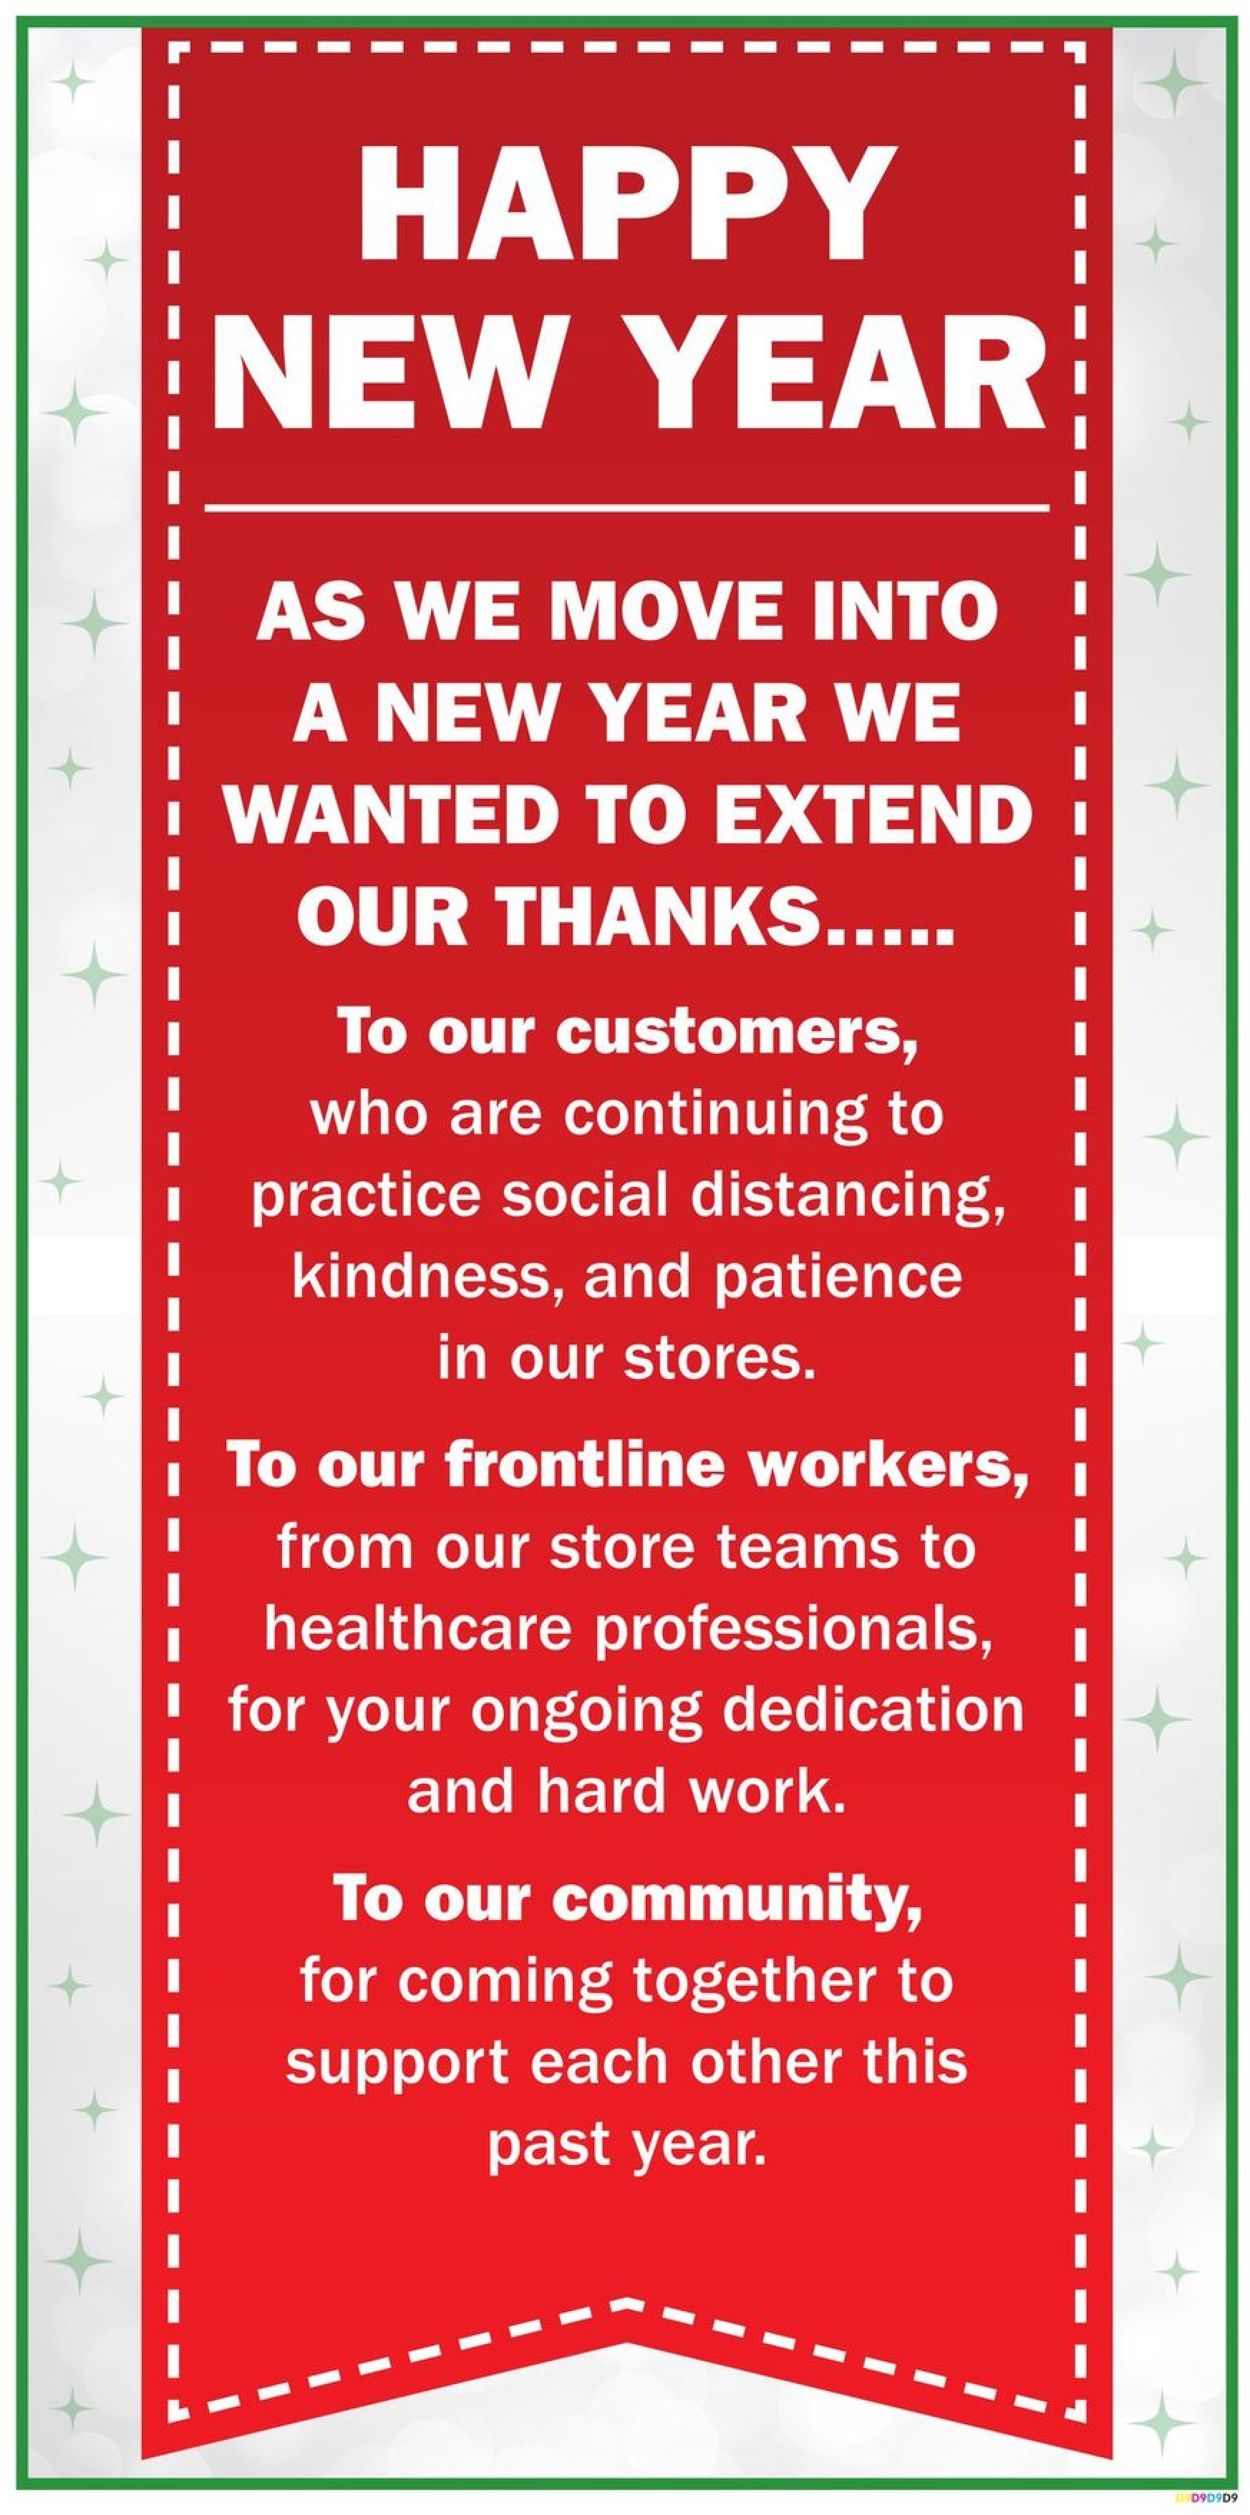 Food Basics Flyer from 12/26/2020